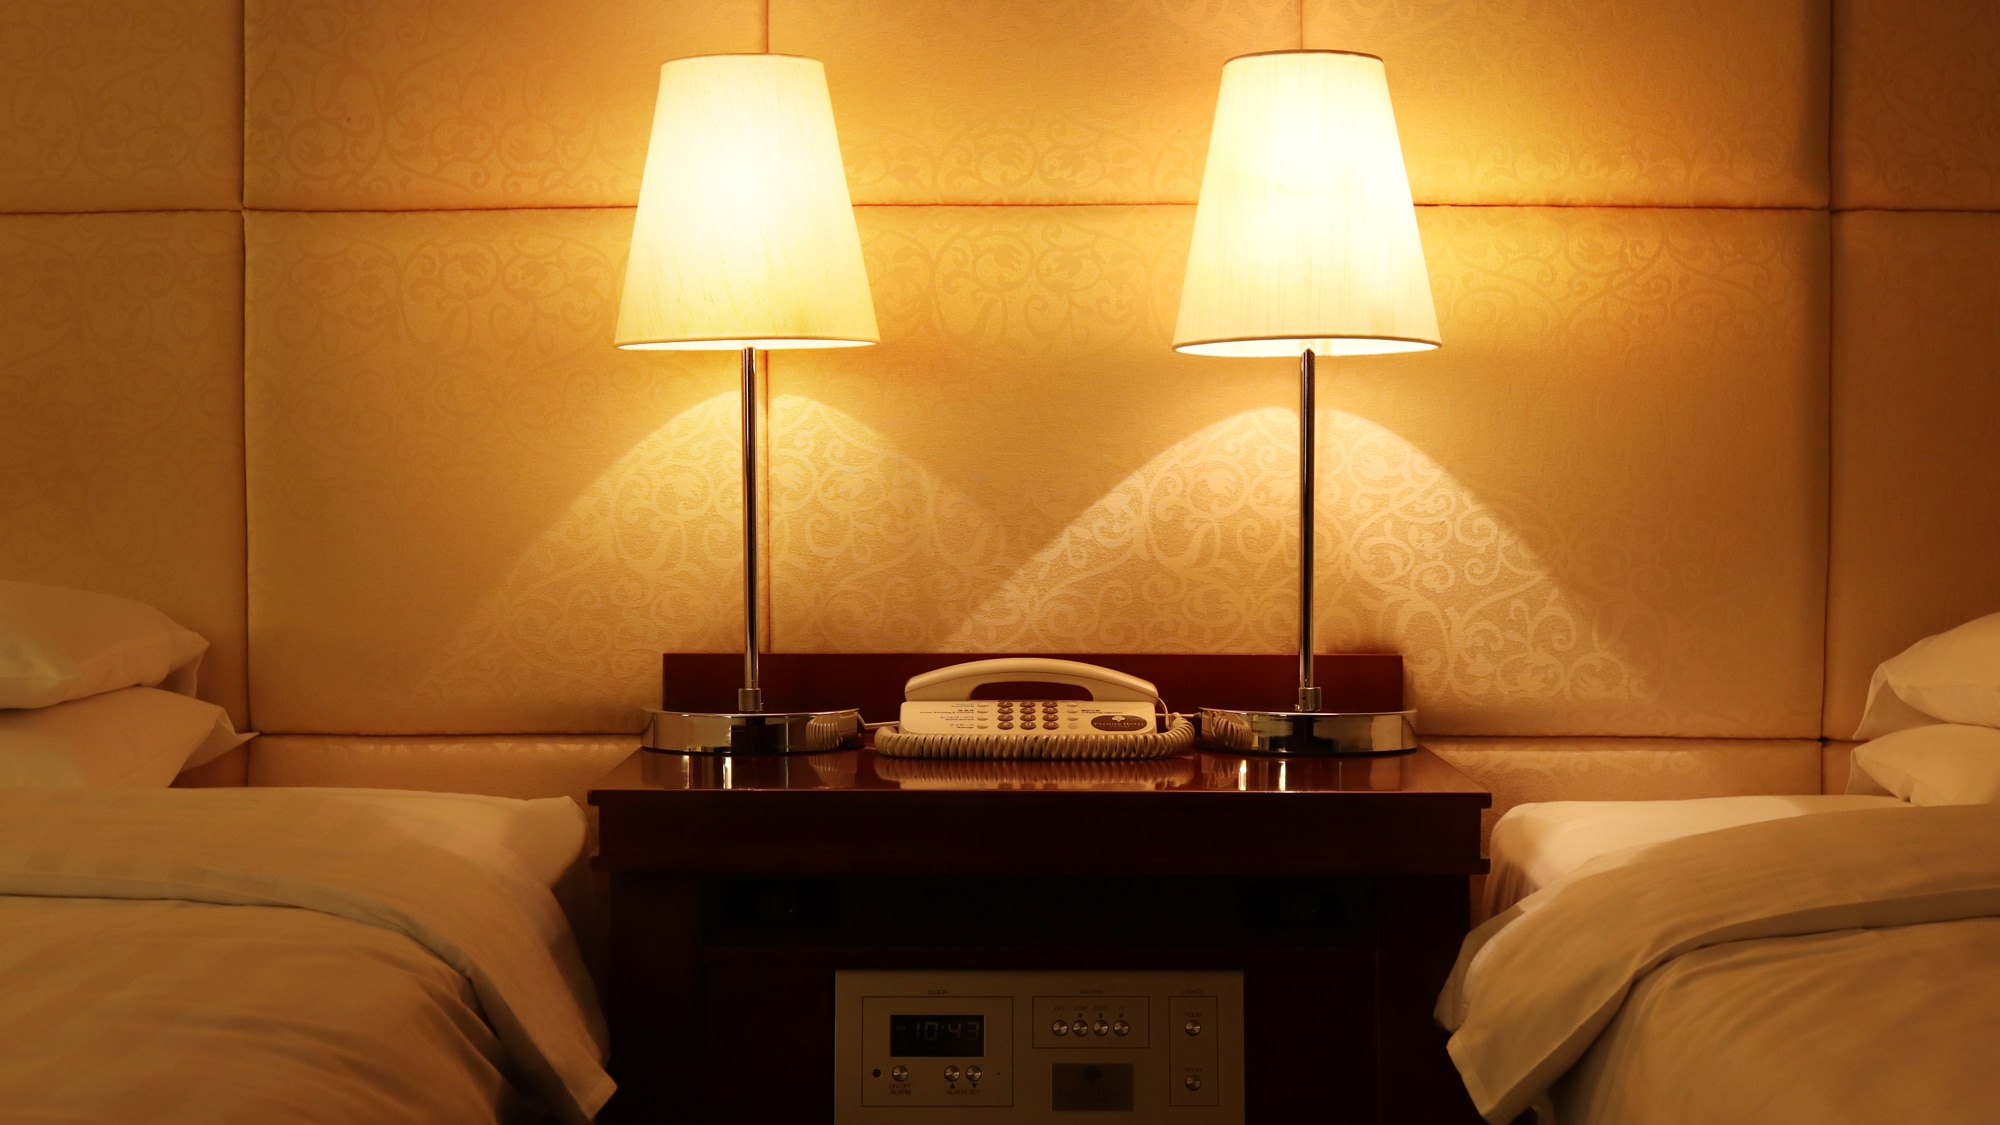 [Guest room] Please spend a relaxing time.